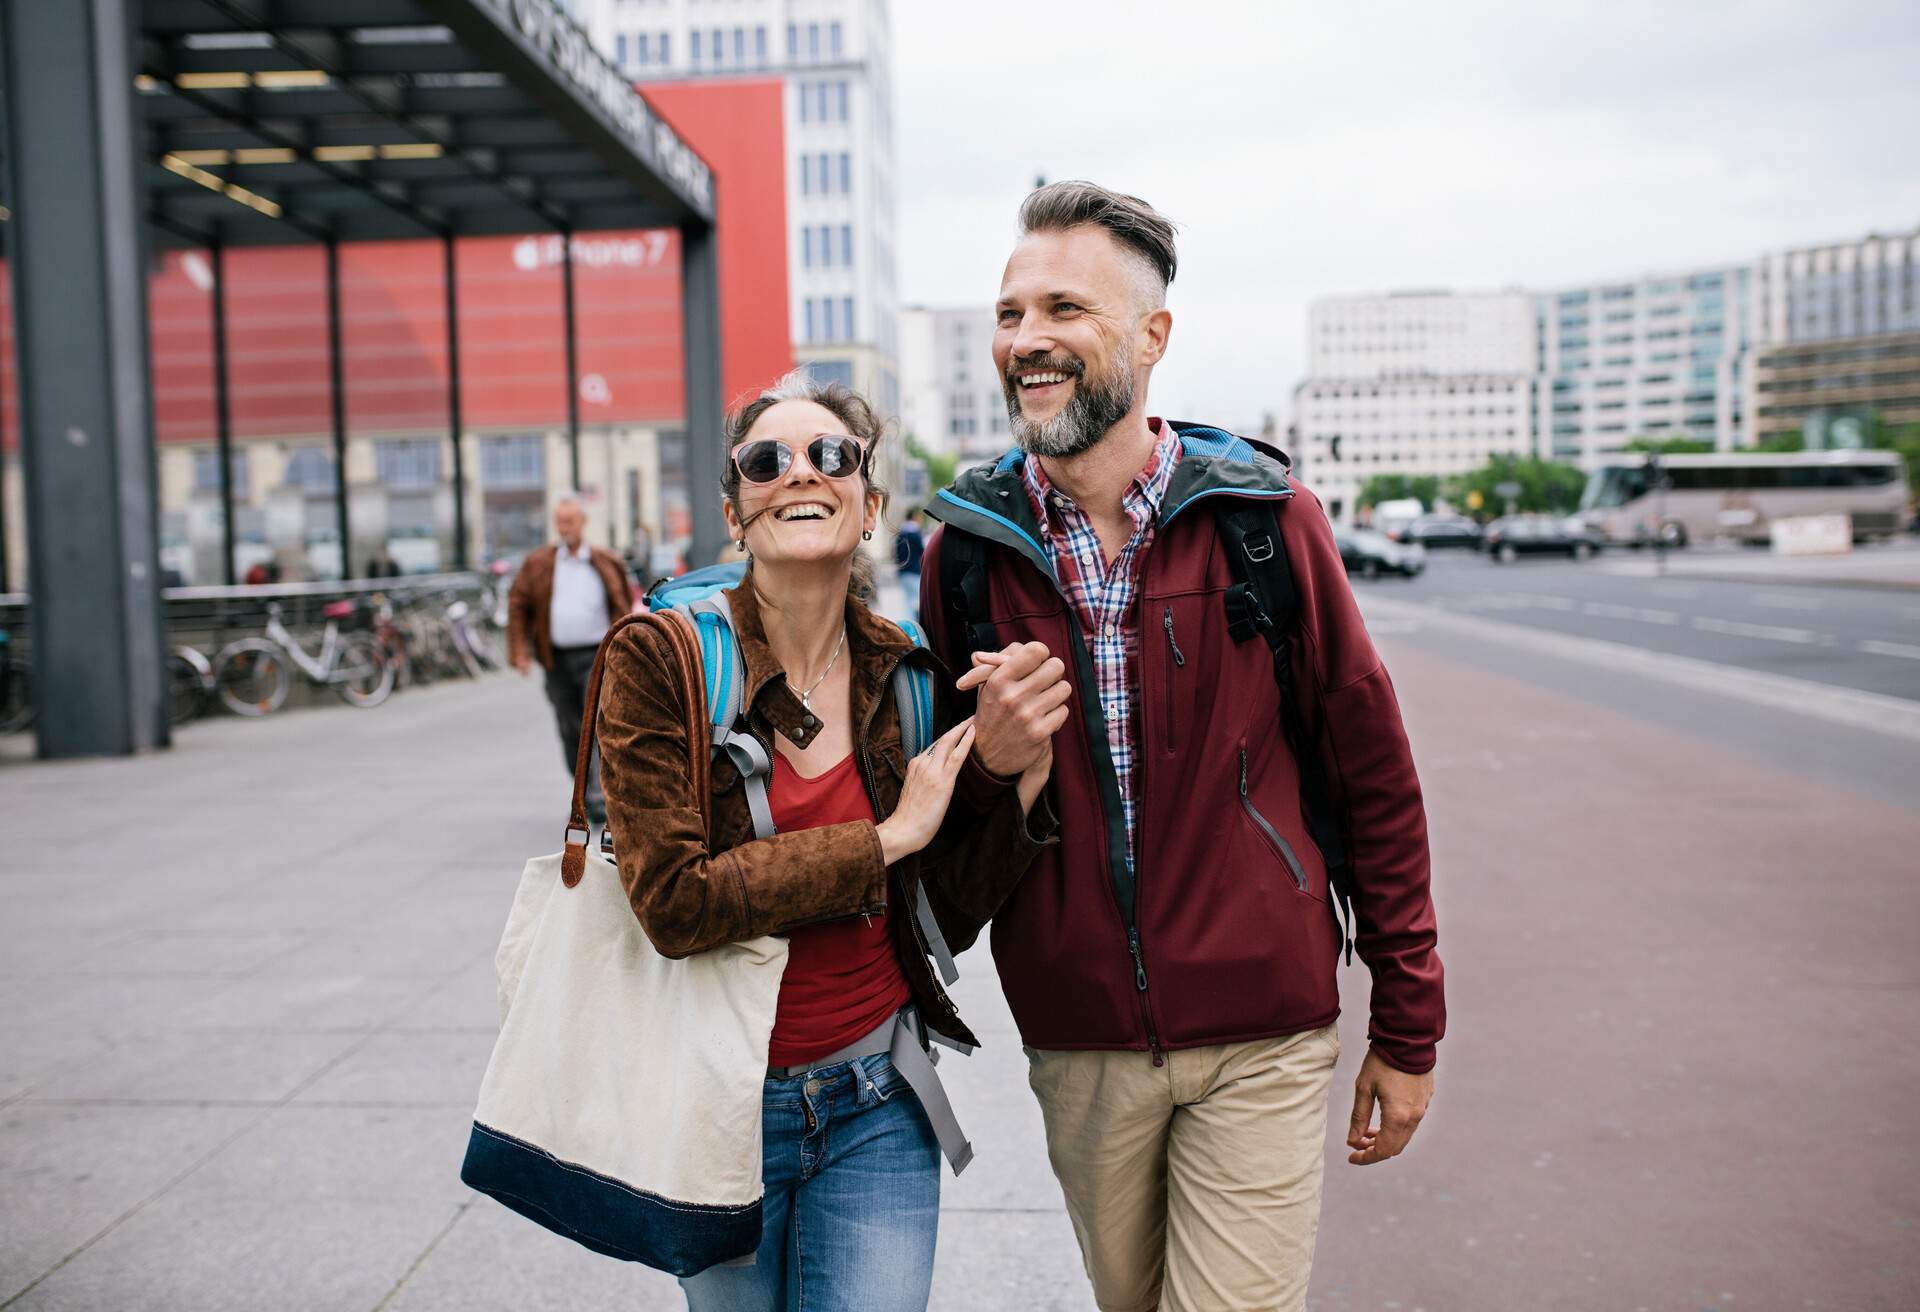 A mature couple are holding hands and smiling as they walk through Berlin together on a day trip.